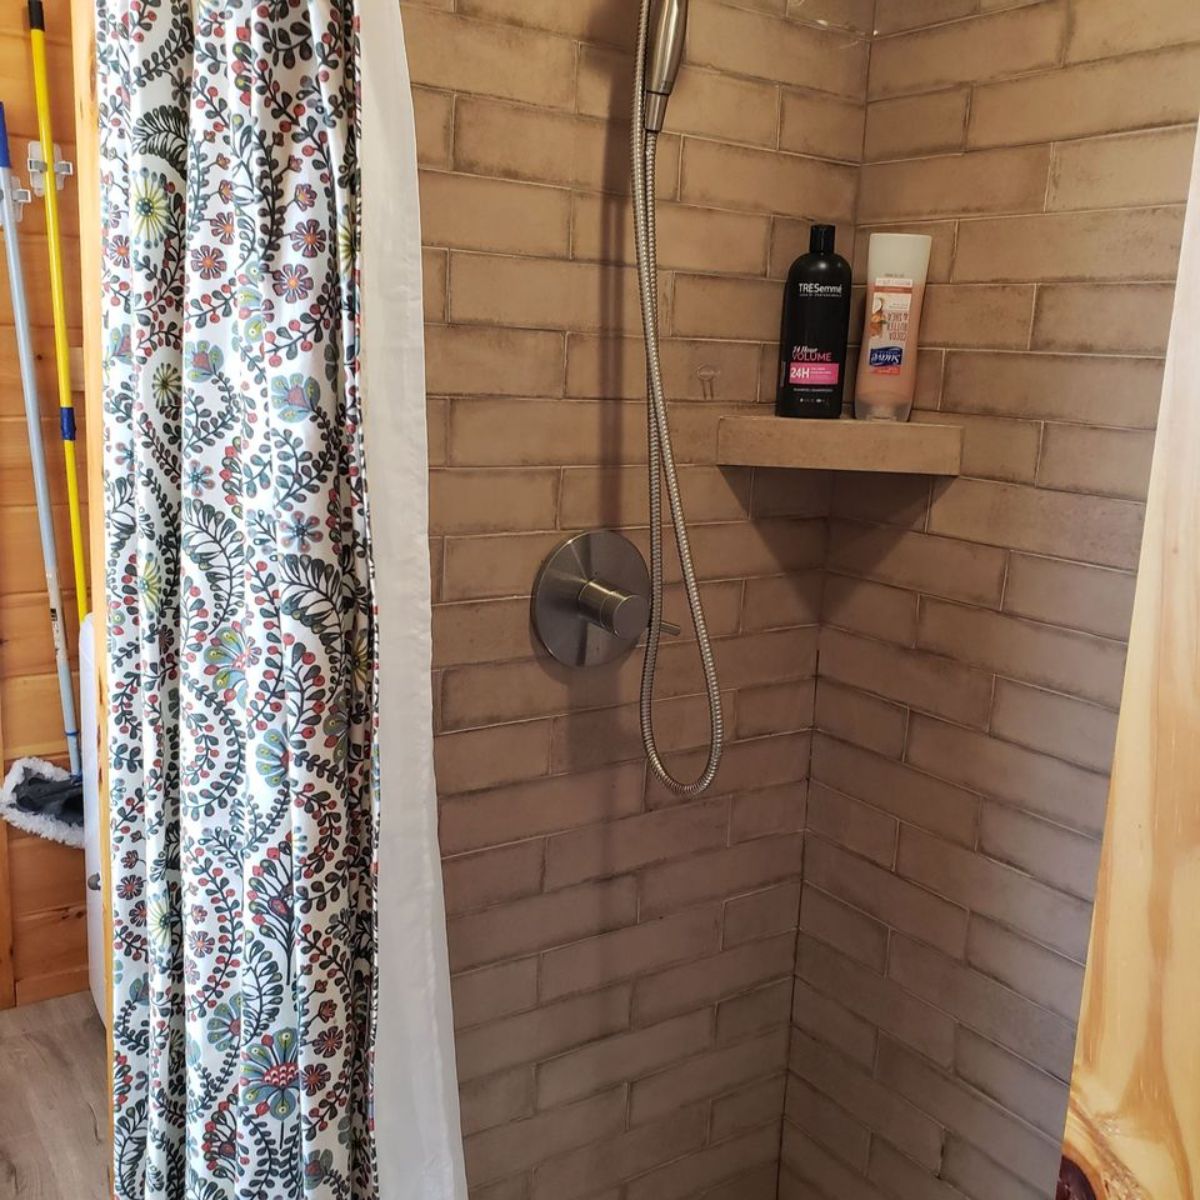 bathroom of container tiny home has all the standard fittings